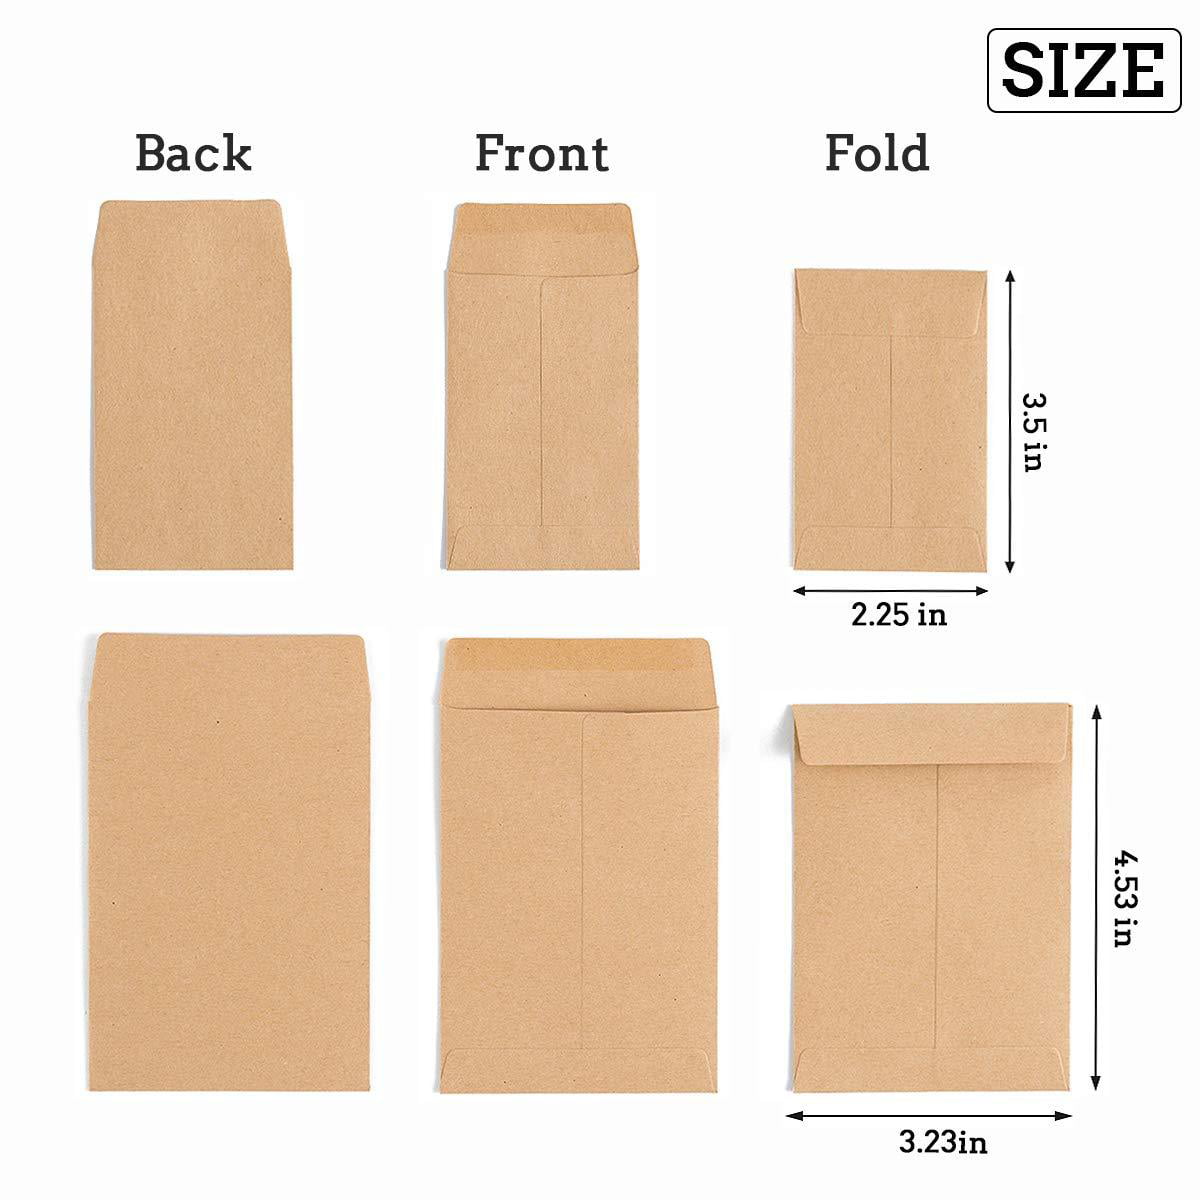 7CO-BLI-1M Size: 3 1/2 x 6 1/2 #7 Coin Envelopes Self Sealing Small Envelopes for Cash Jewelry Seeds with Peel & Press 1000 Pack 80lb Black Linen Business Cards 